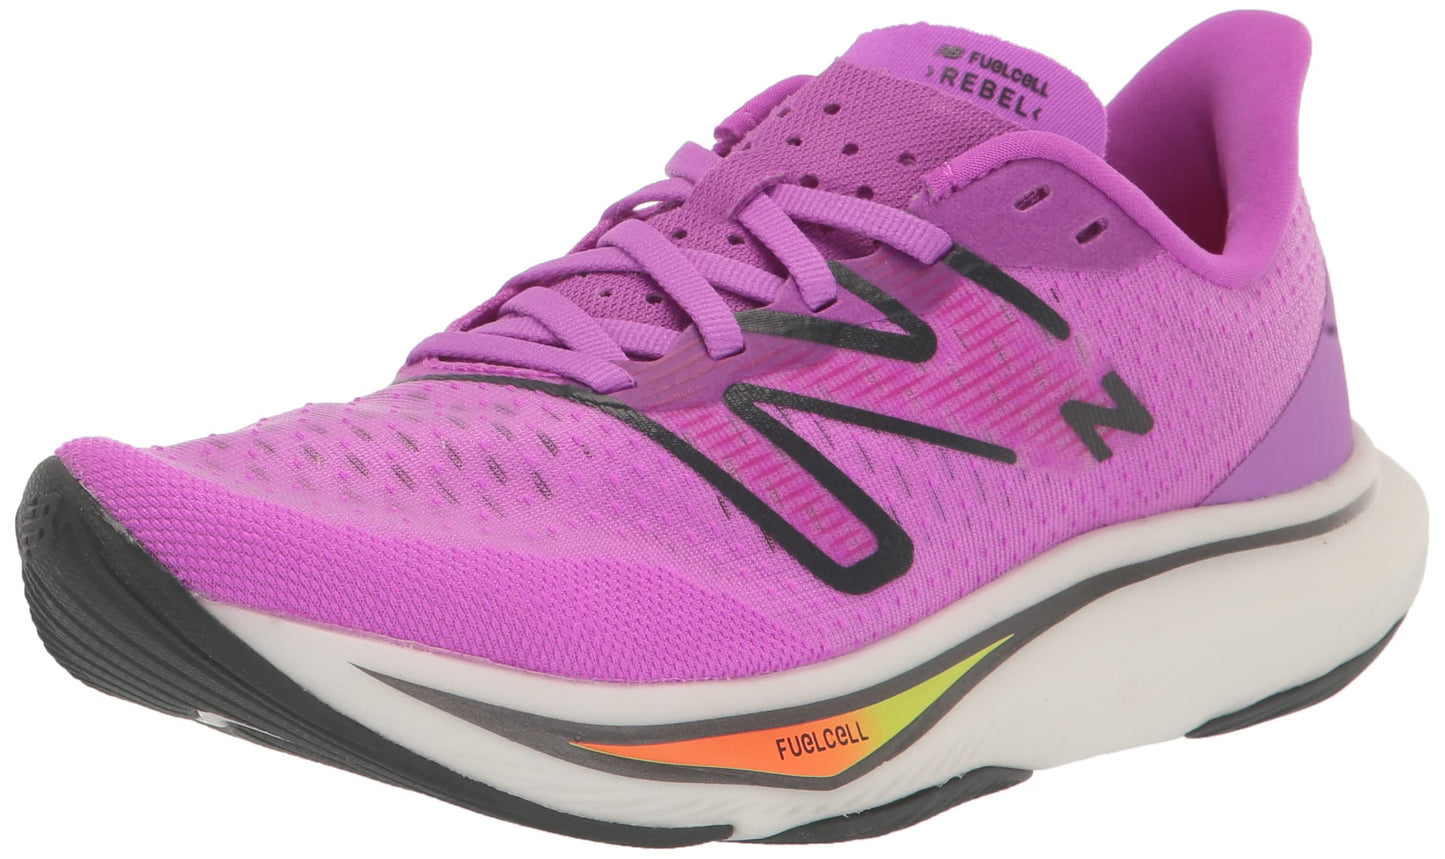 New Balance Women's FuelCell Rebel V3 Running Shoe, Cosmic Rose/Blacktop/Neon Dragonfly, 7.5 Wide